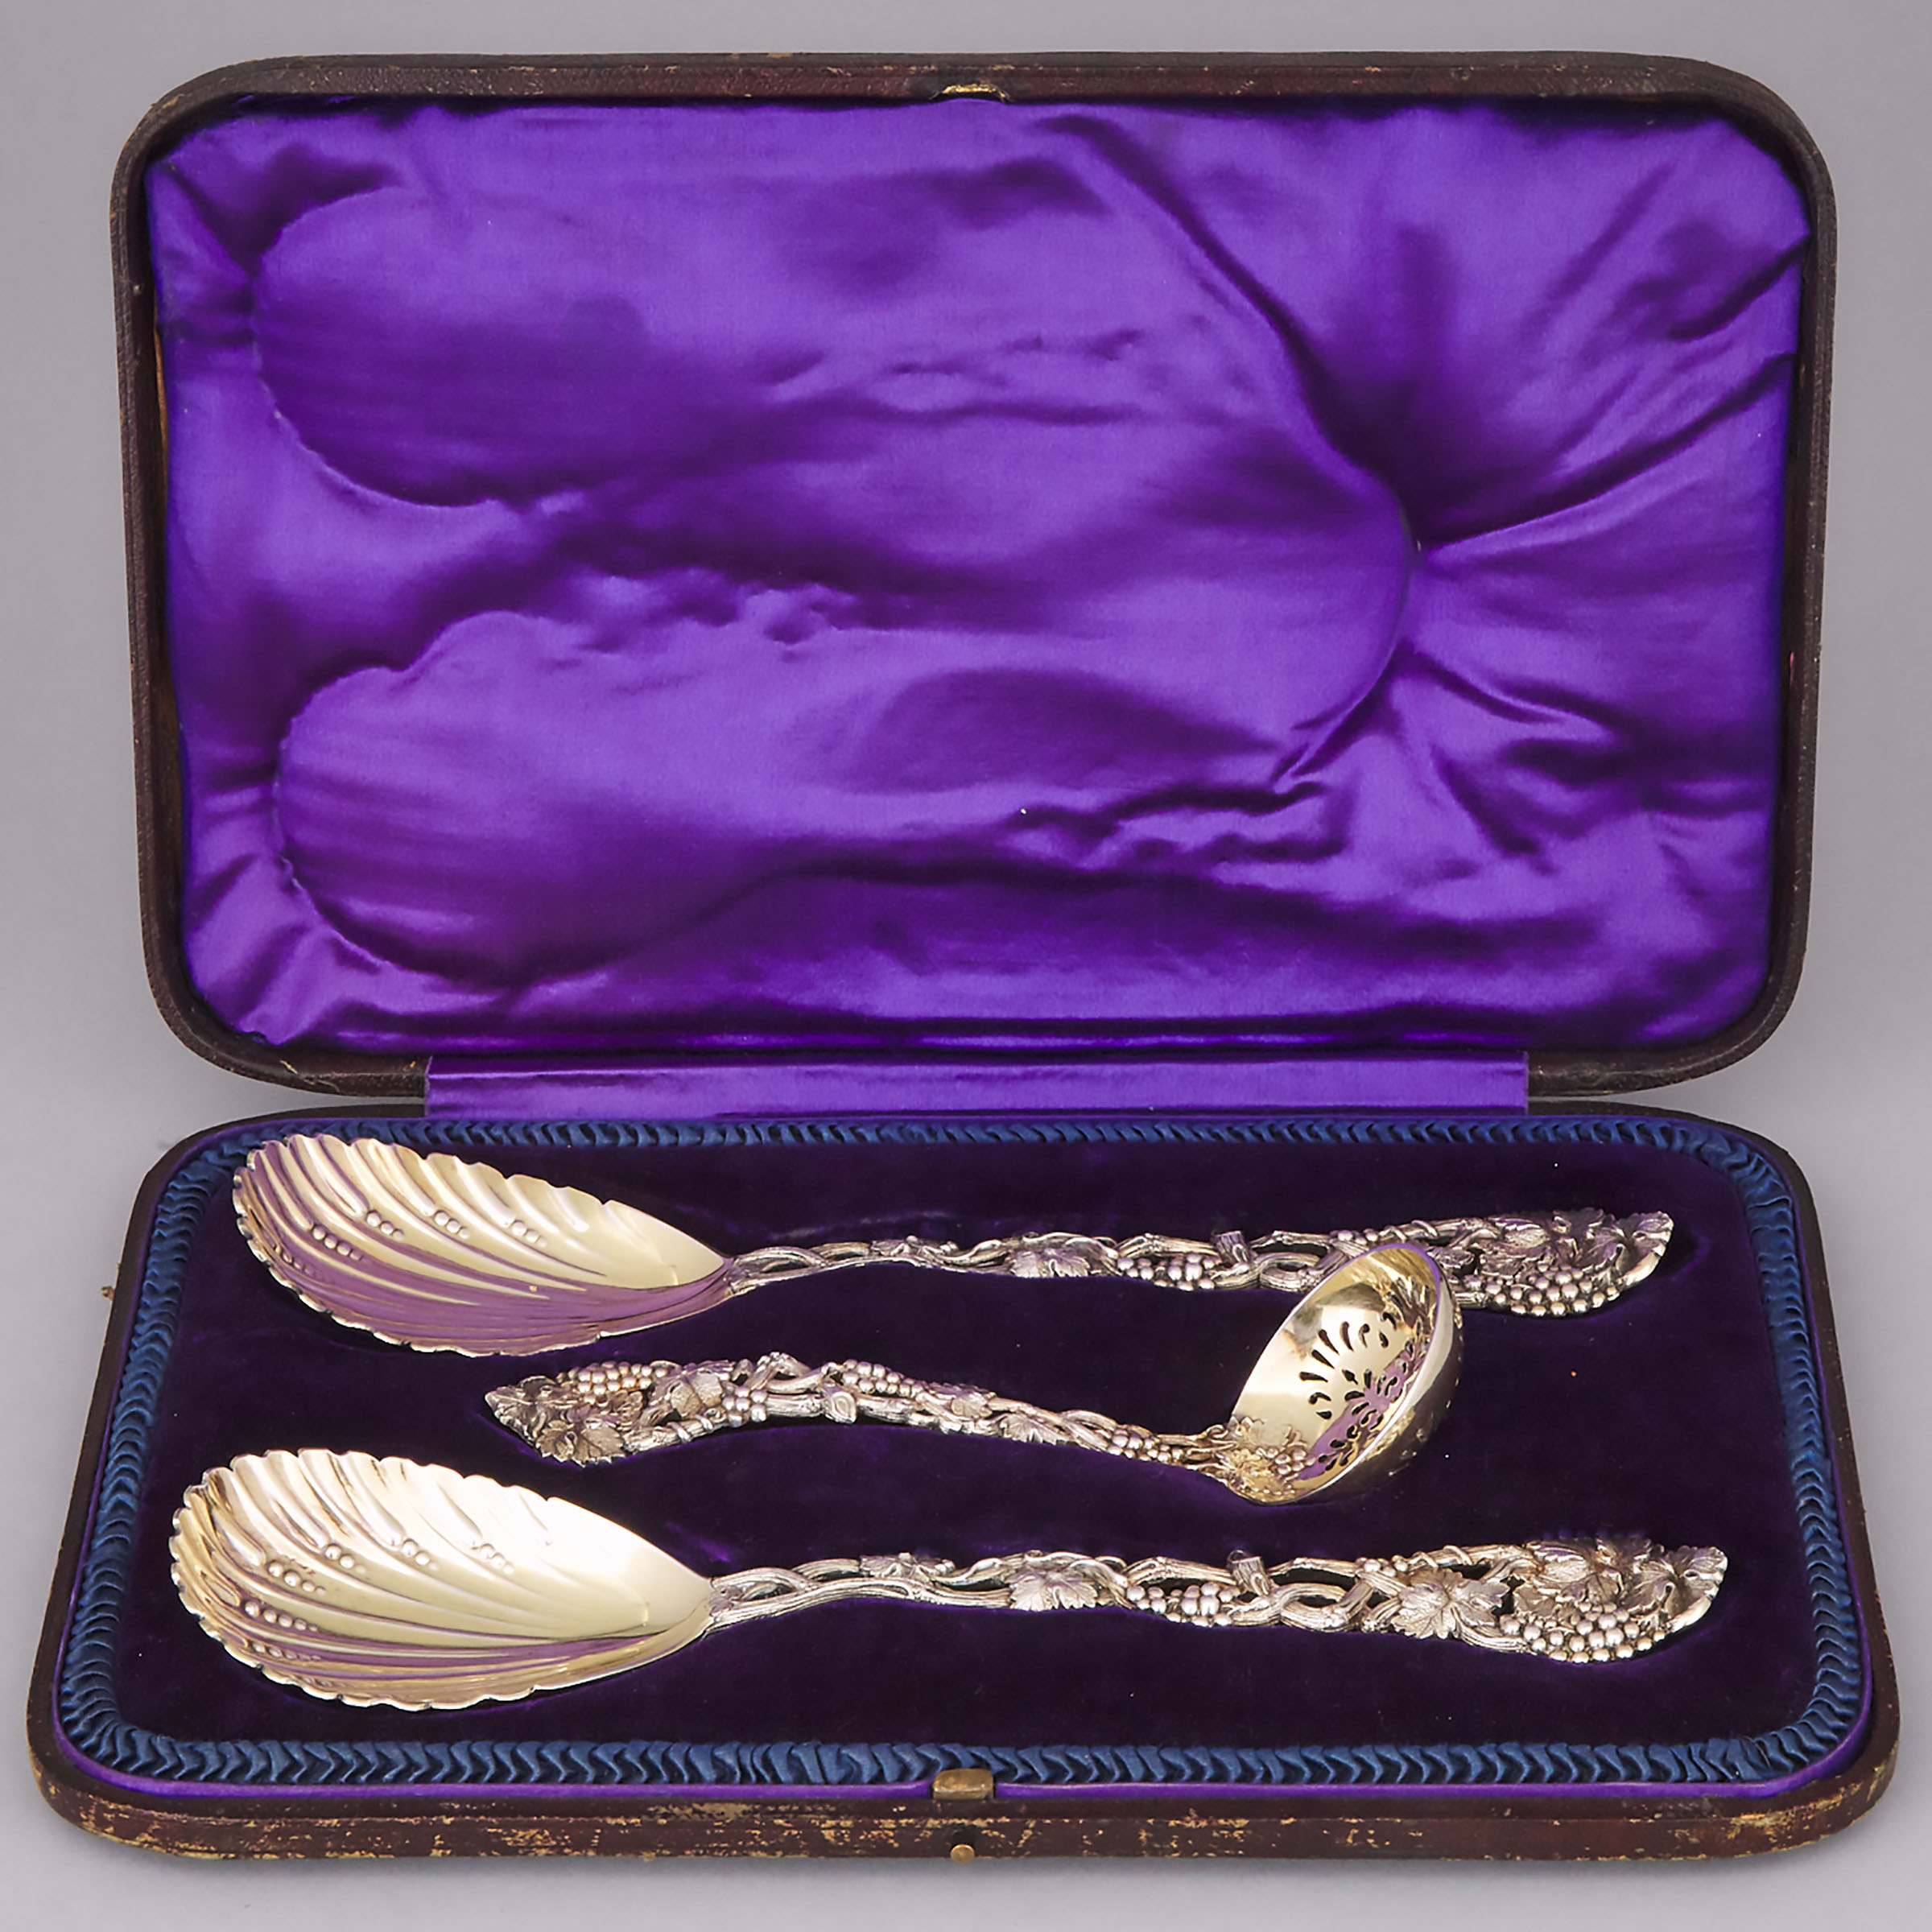 Pair of Victorian Silver-Gilt Vine Pattern Berry Spoons and a Sifting Ladle, John Aldwinckle & Thomas Slater, London, 1890/91